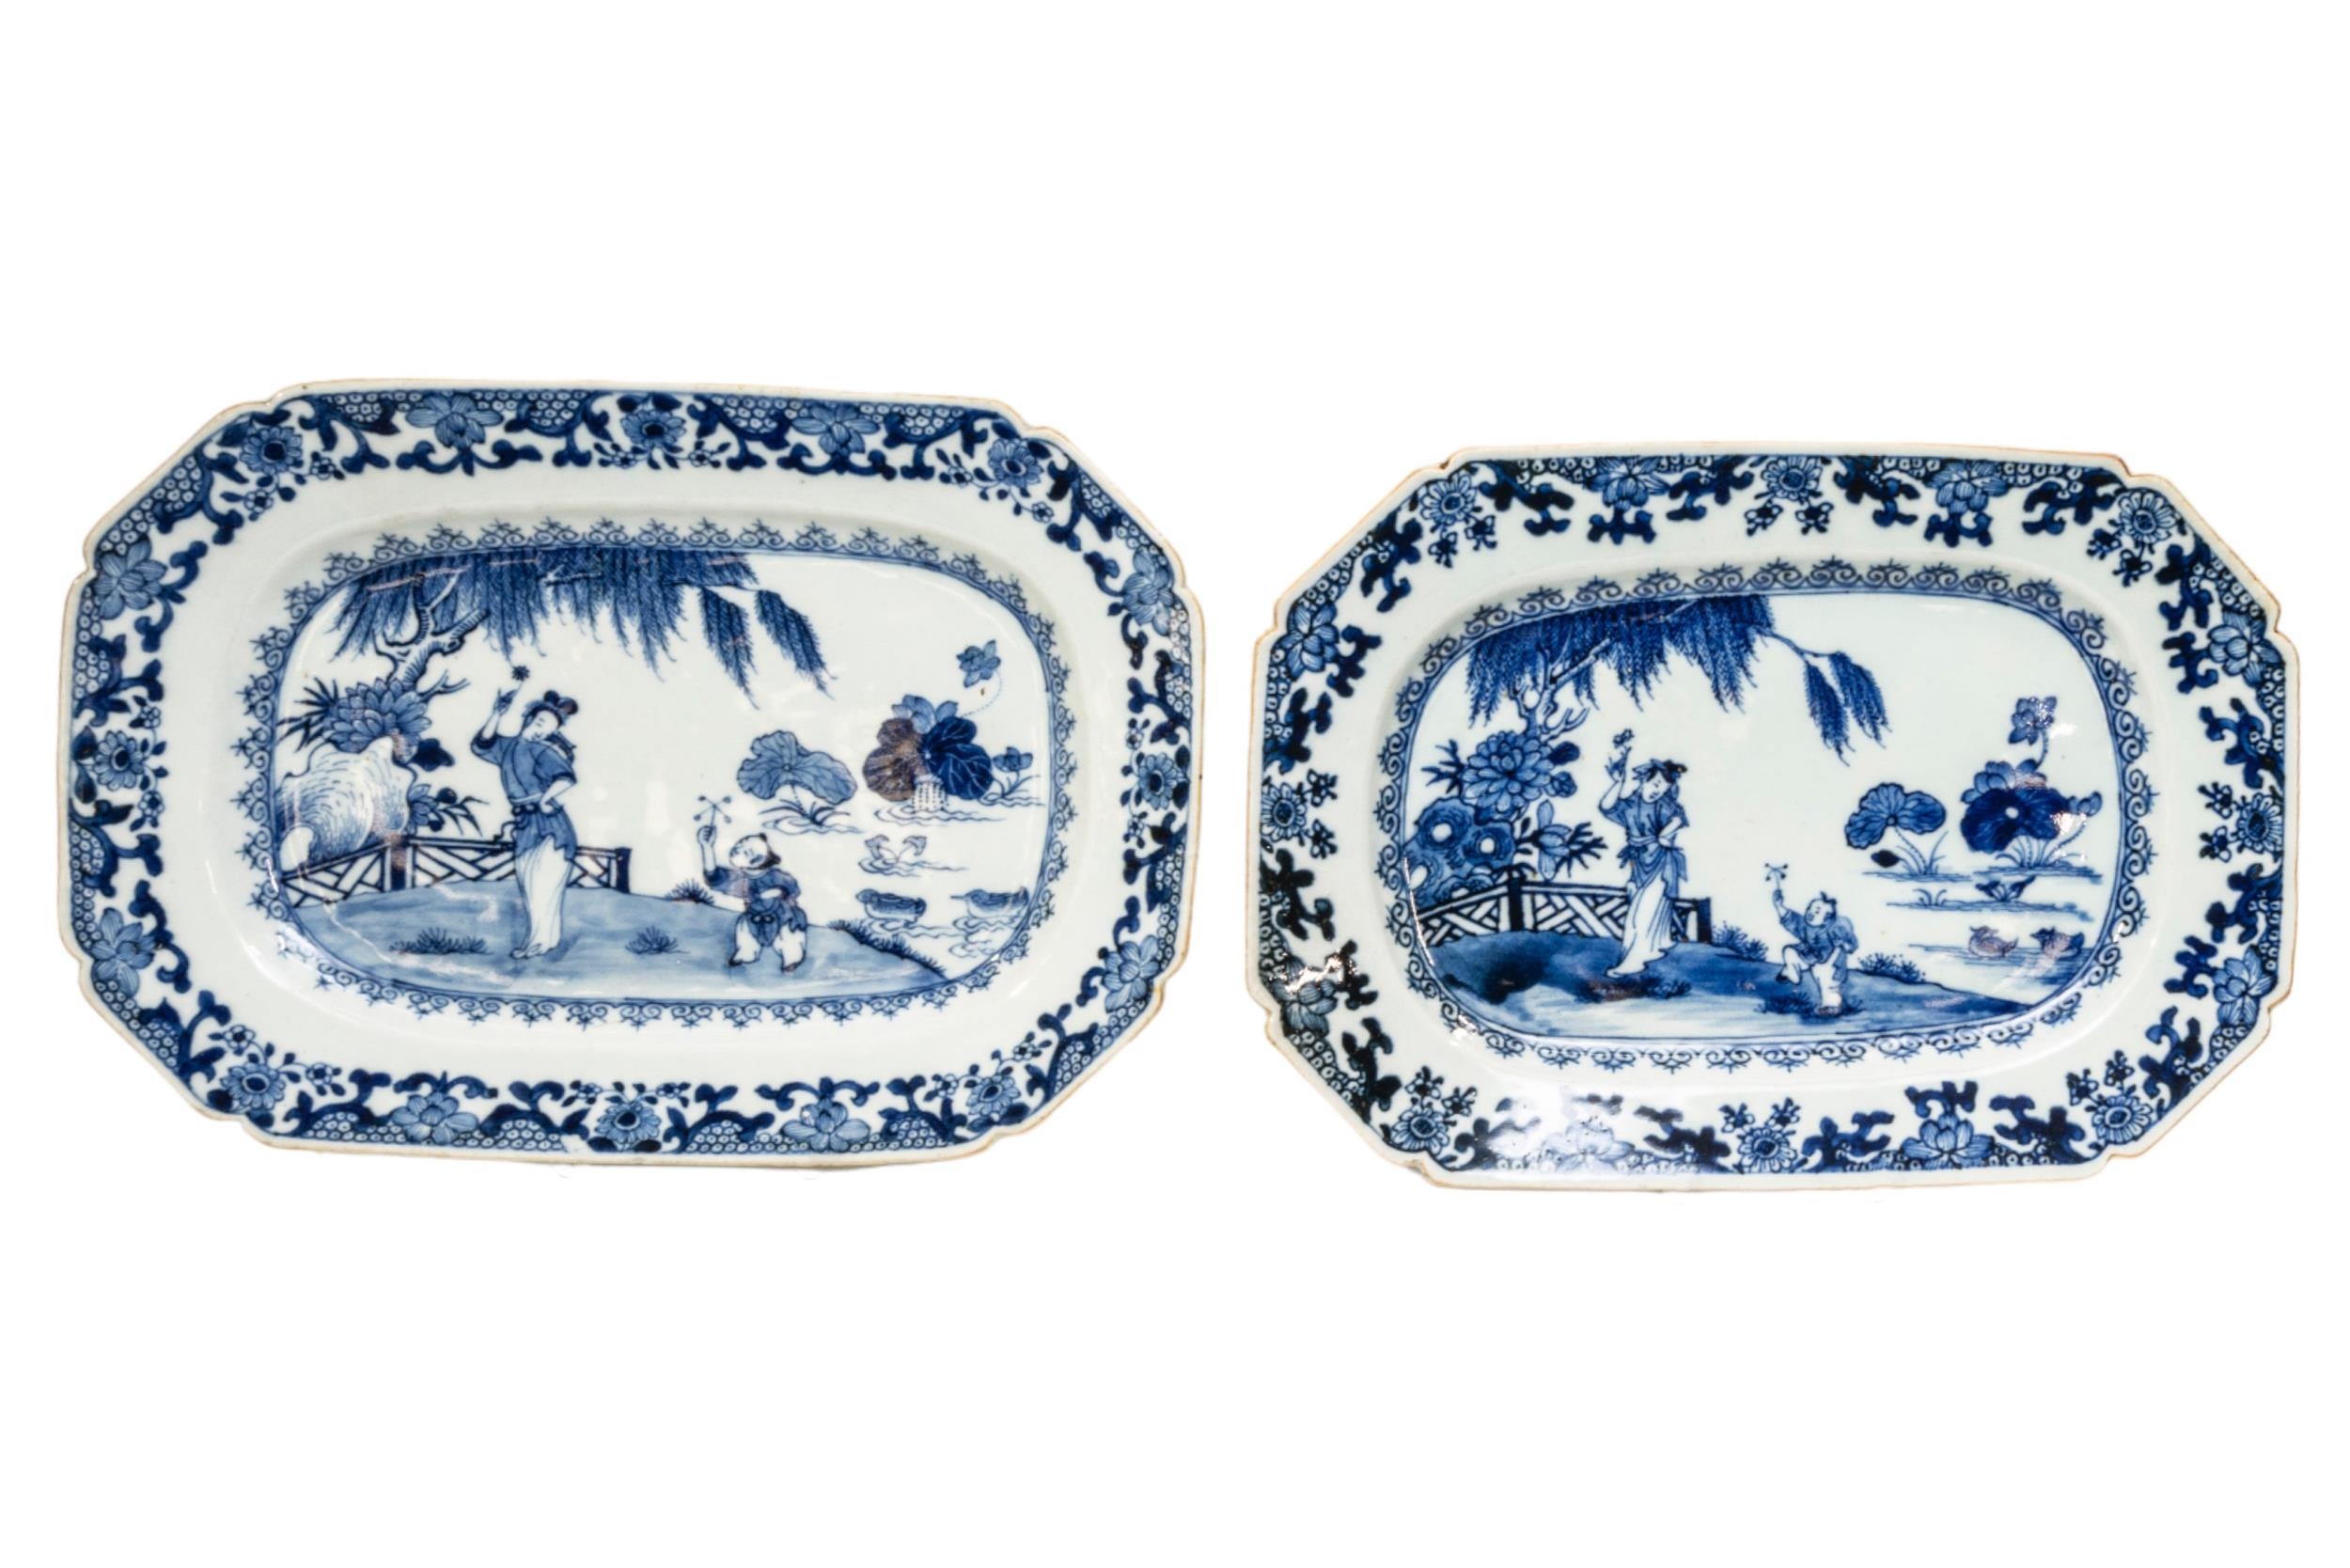 A VARIED COLLECTION OF CHINESE EXPORT BLUE & WHITE PORCELAIN WARE, 18TH/19TH CENTURY, the lot - Image 6 of 13